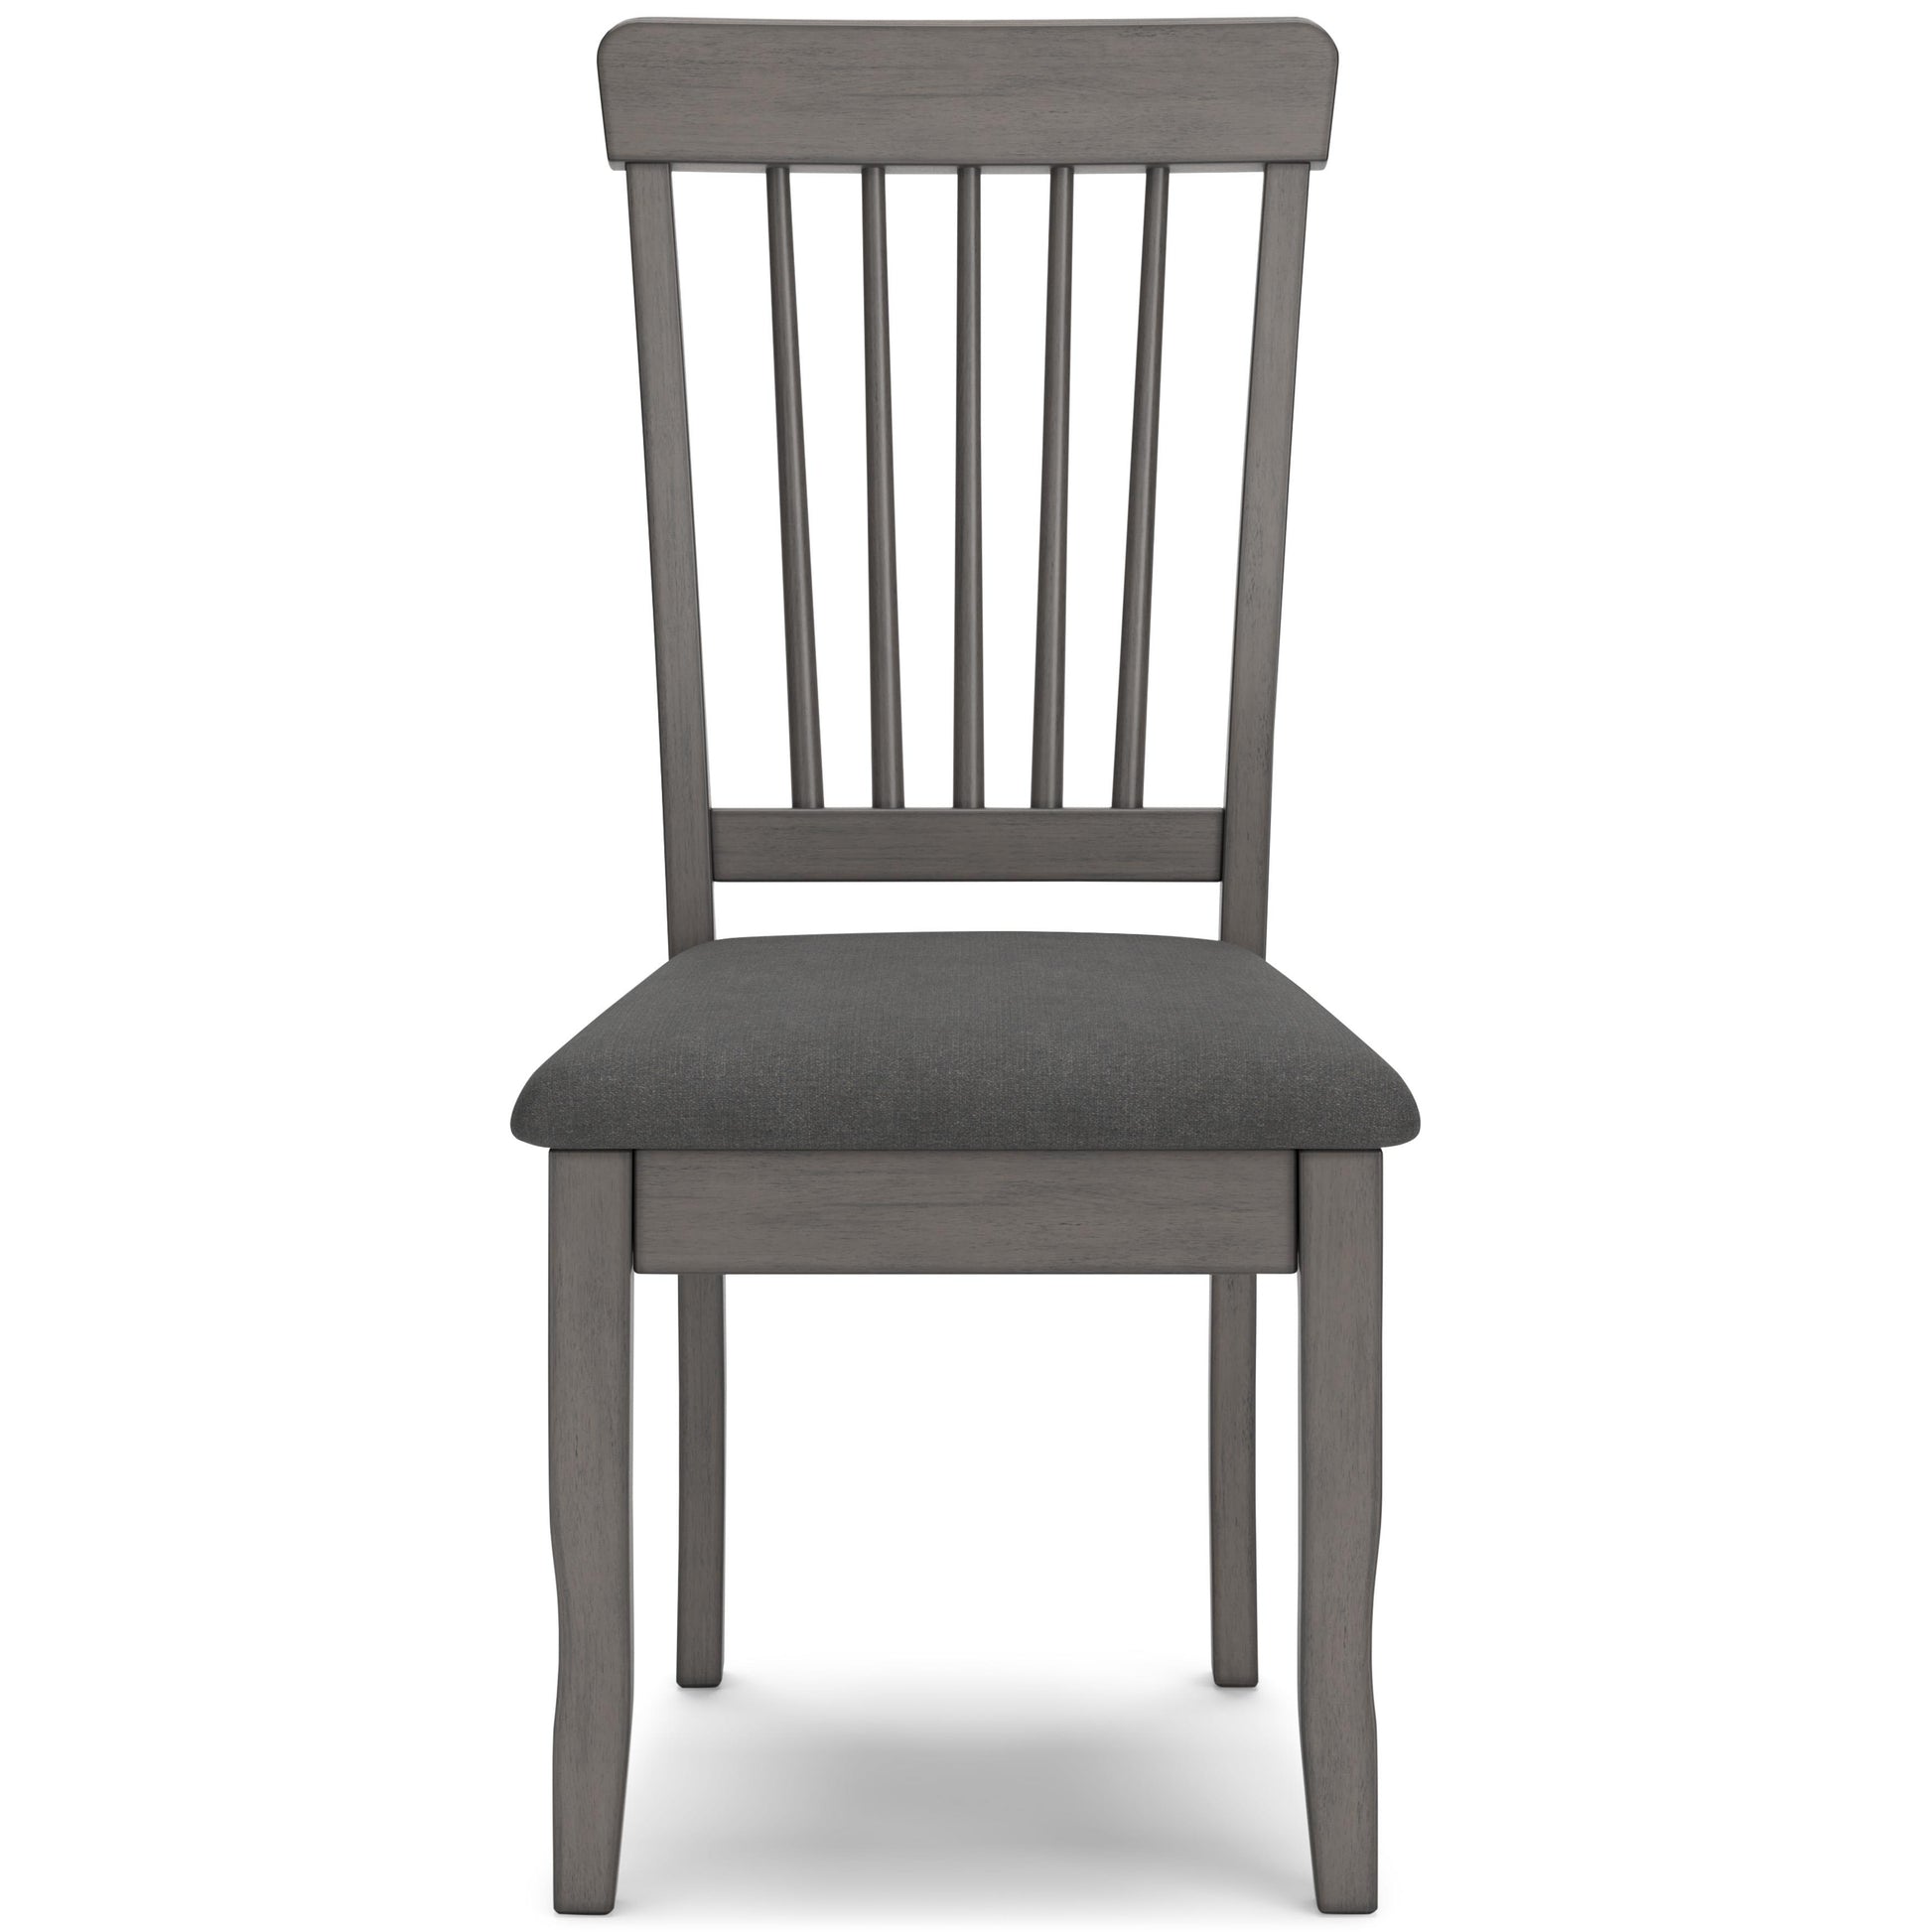 Signature Design by Ashley Shullden Dining Chair D194-01